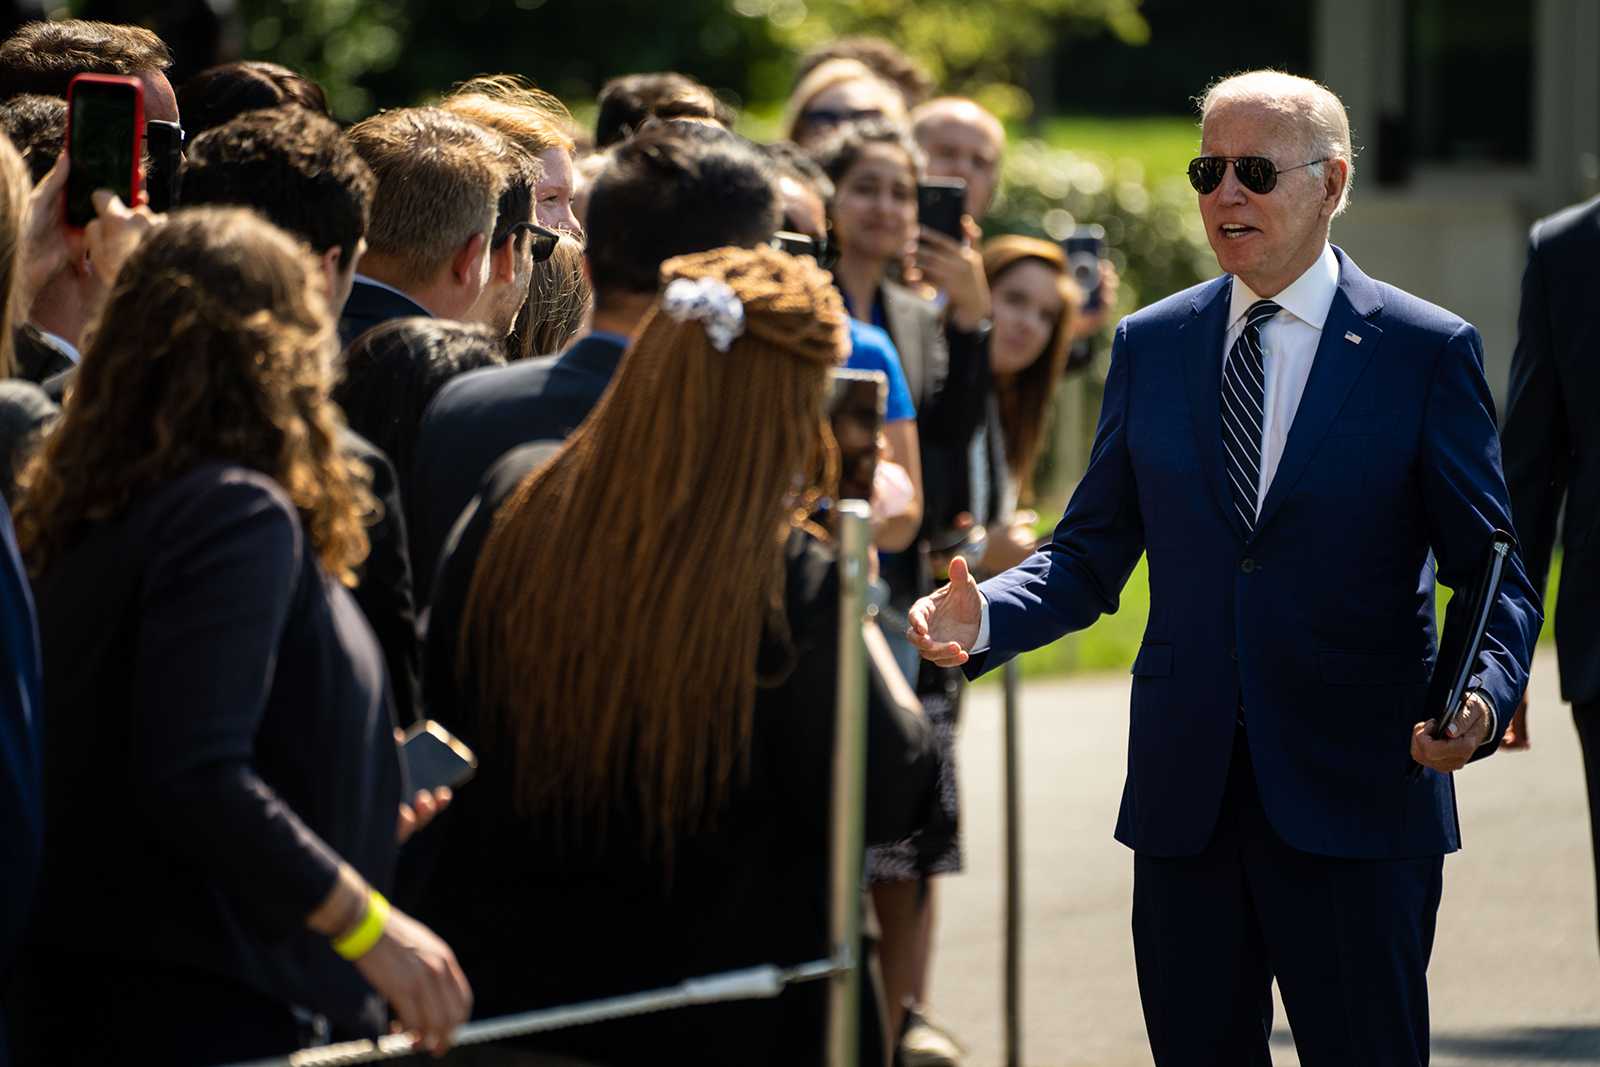 President Joe Biden greets guests after disembarking from Marine One, returning to the White House from Rehoboth, Delaware, on the South Lawn of the White House on Wednesday, Aug. 24, 2022, in Washington, DC. (Kent Nishimura/Los Angeles Times/TNS)